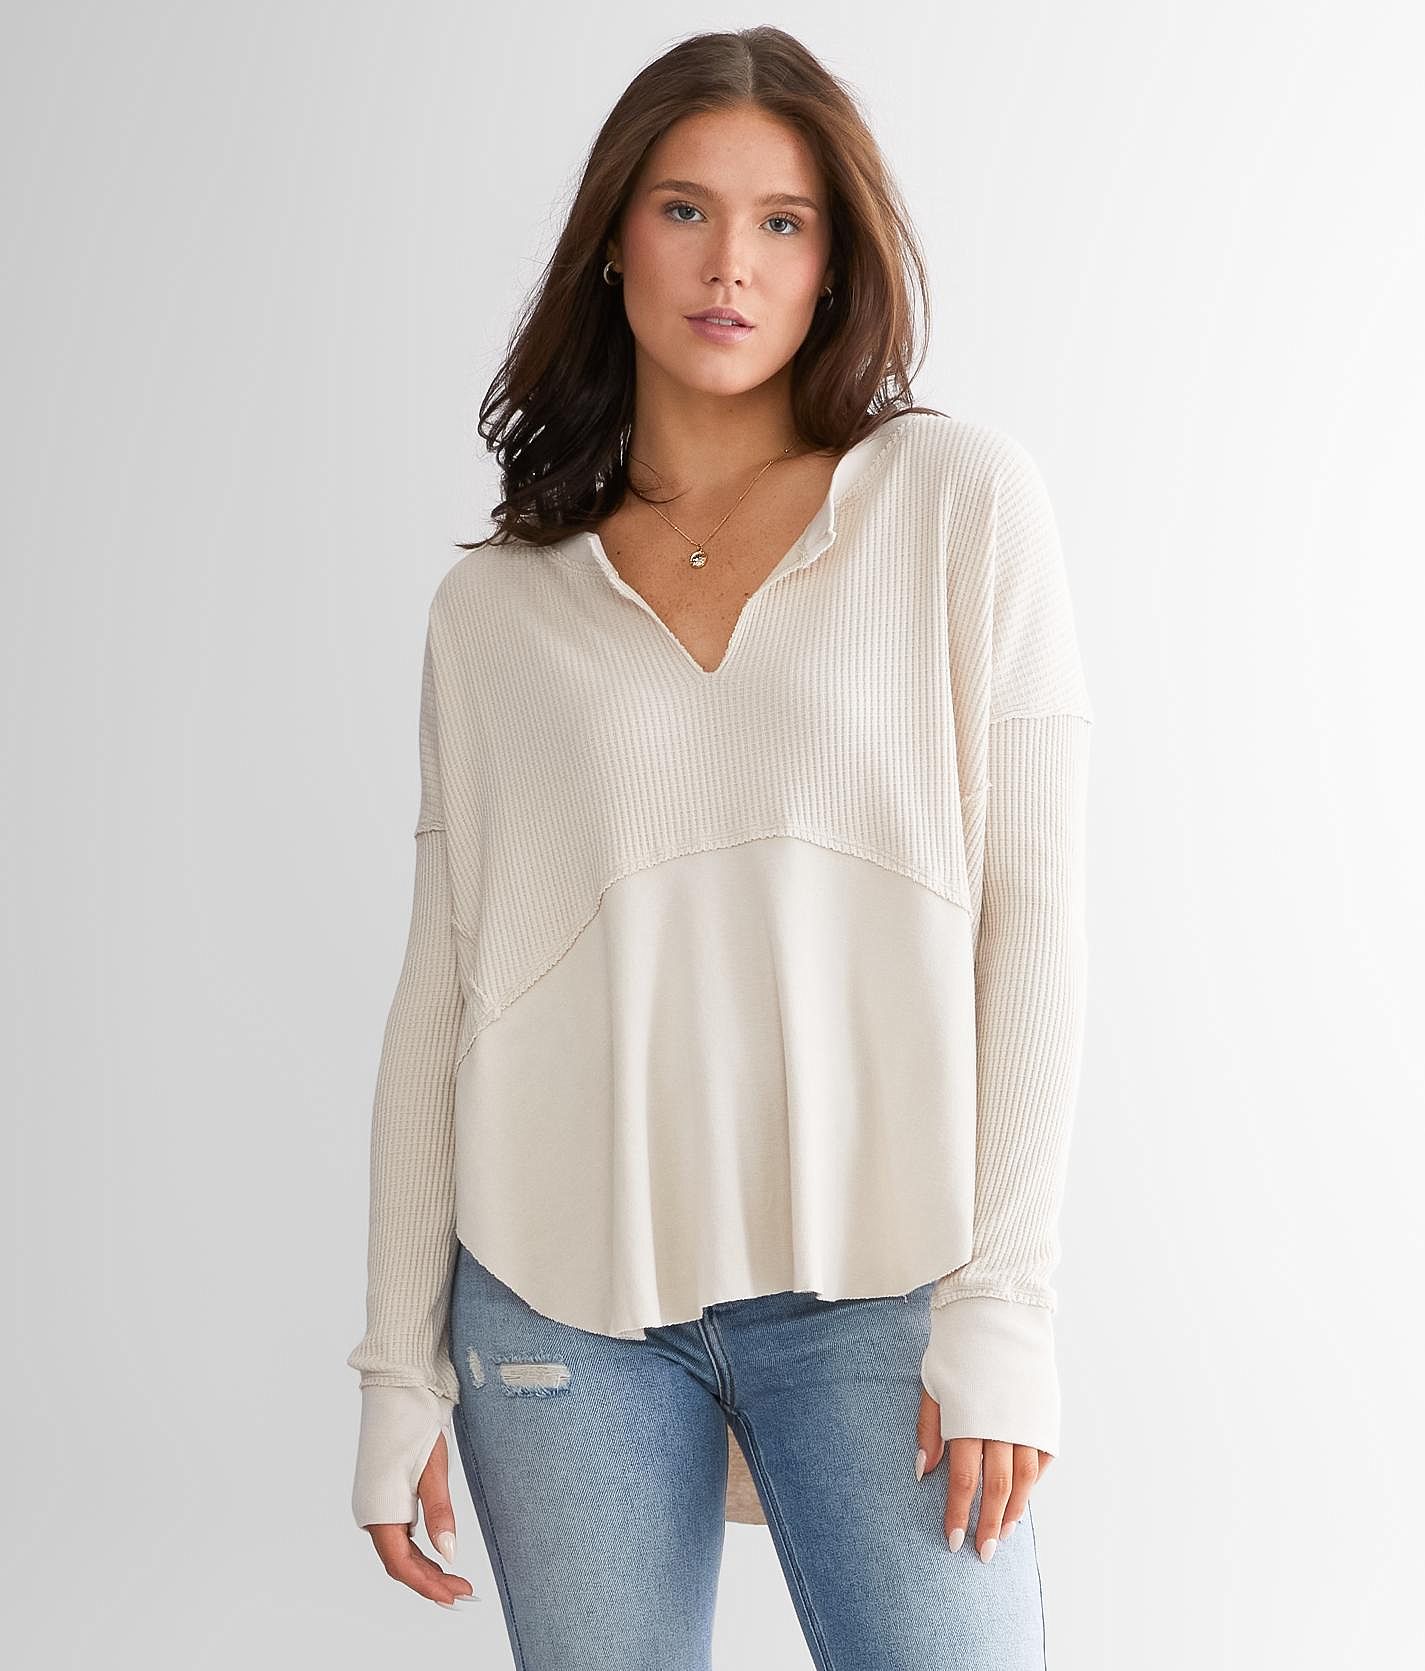 Montery Thermal Top